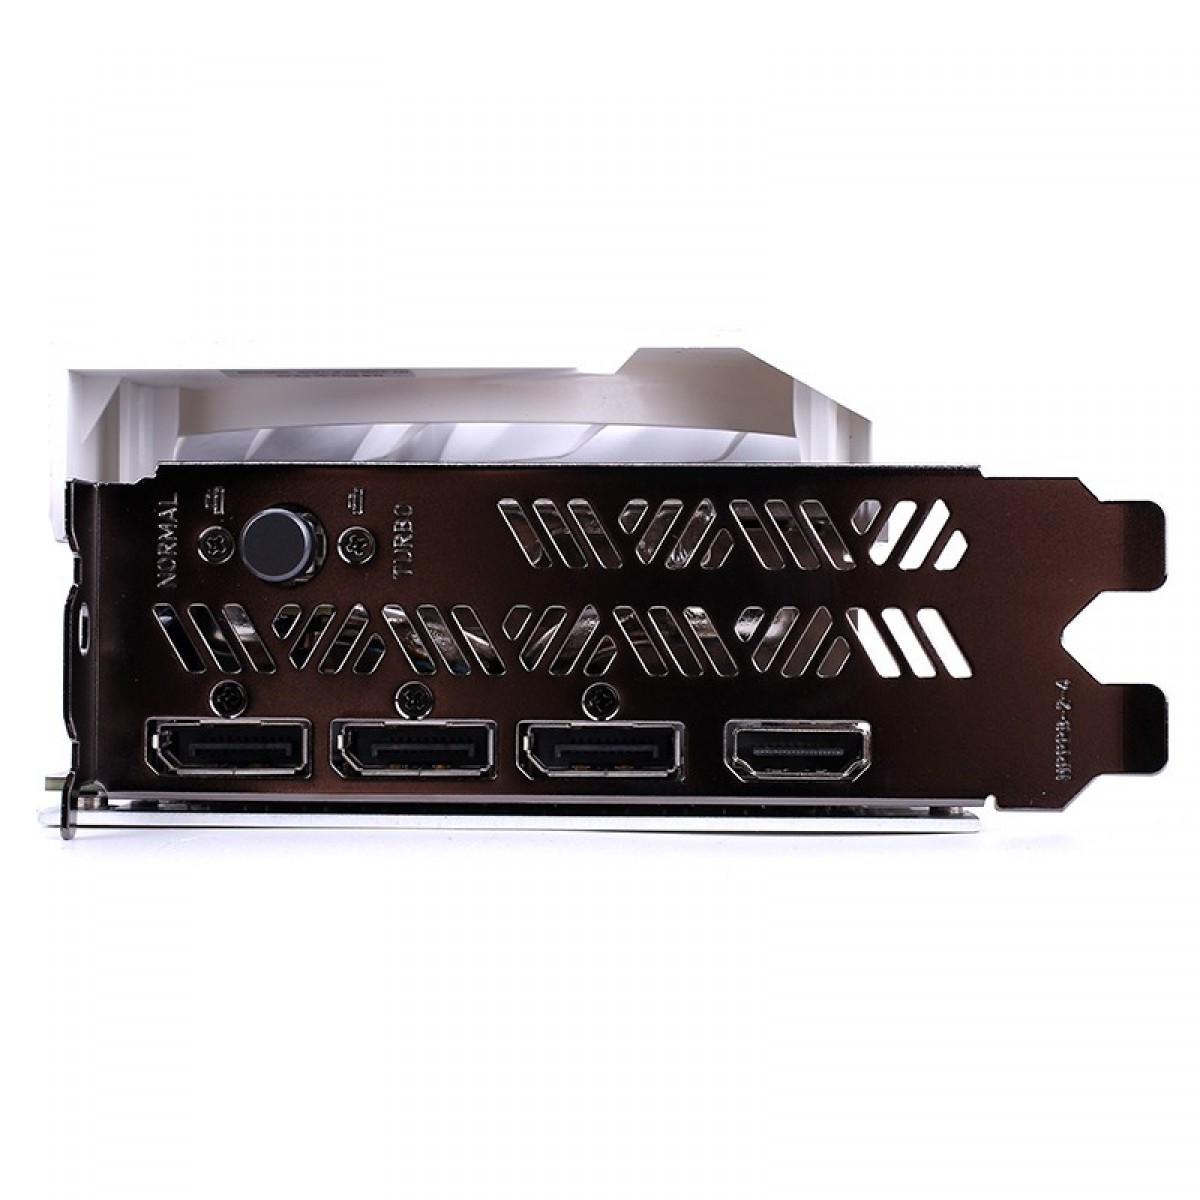 Placa de Vídeo Colorful iGame GeForce RTX 3060 Ti Ultra, White, OC, LHR, 8GB, GDDR6, DLSS, Ray Tracing,